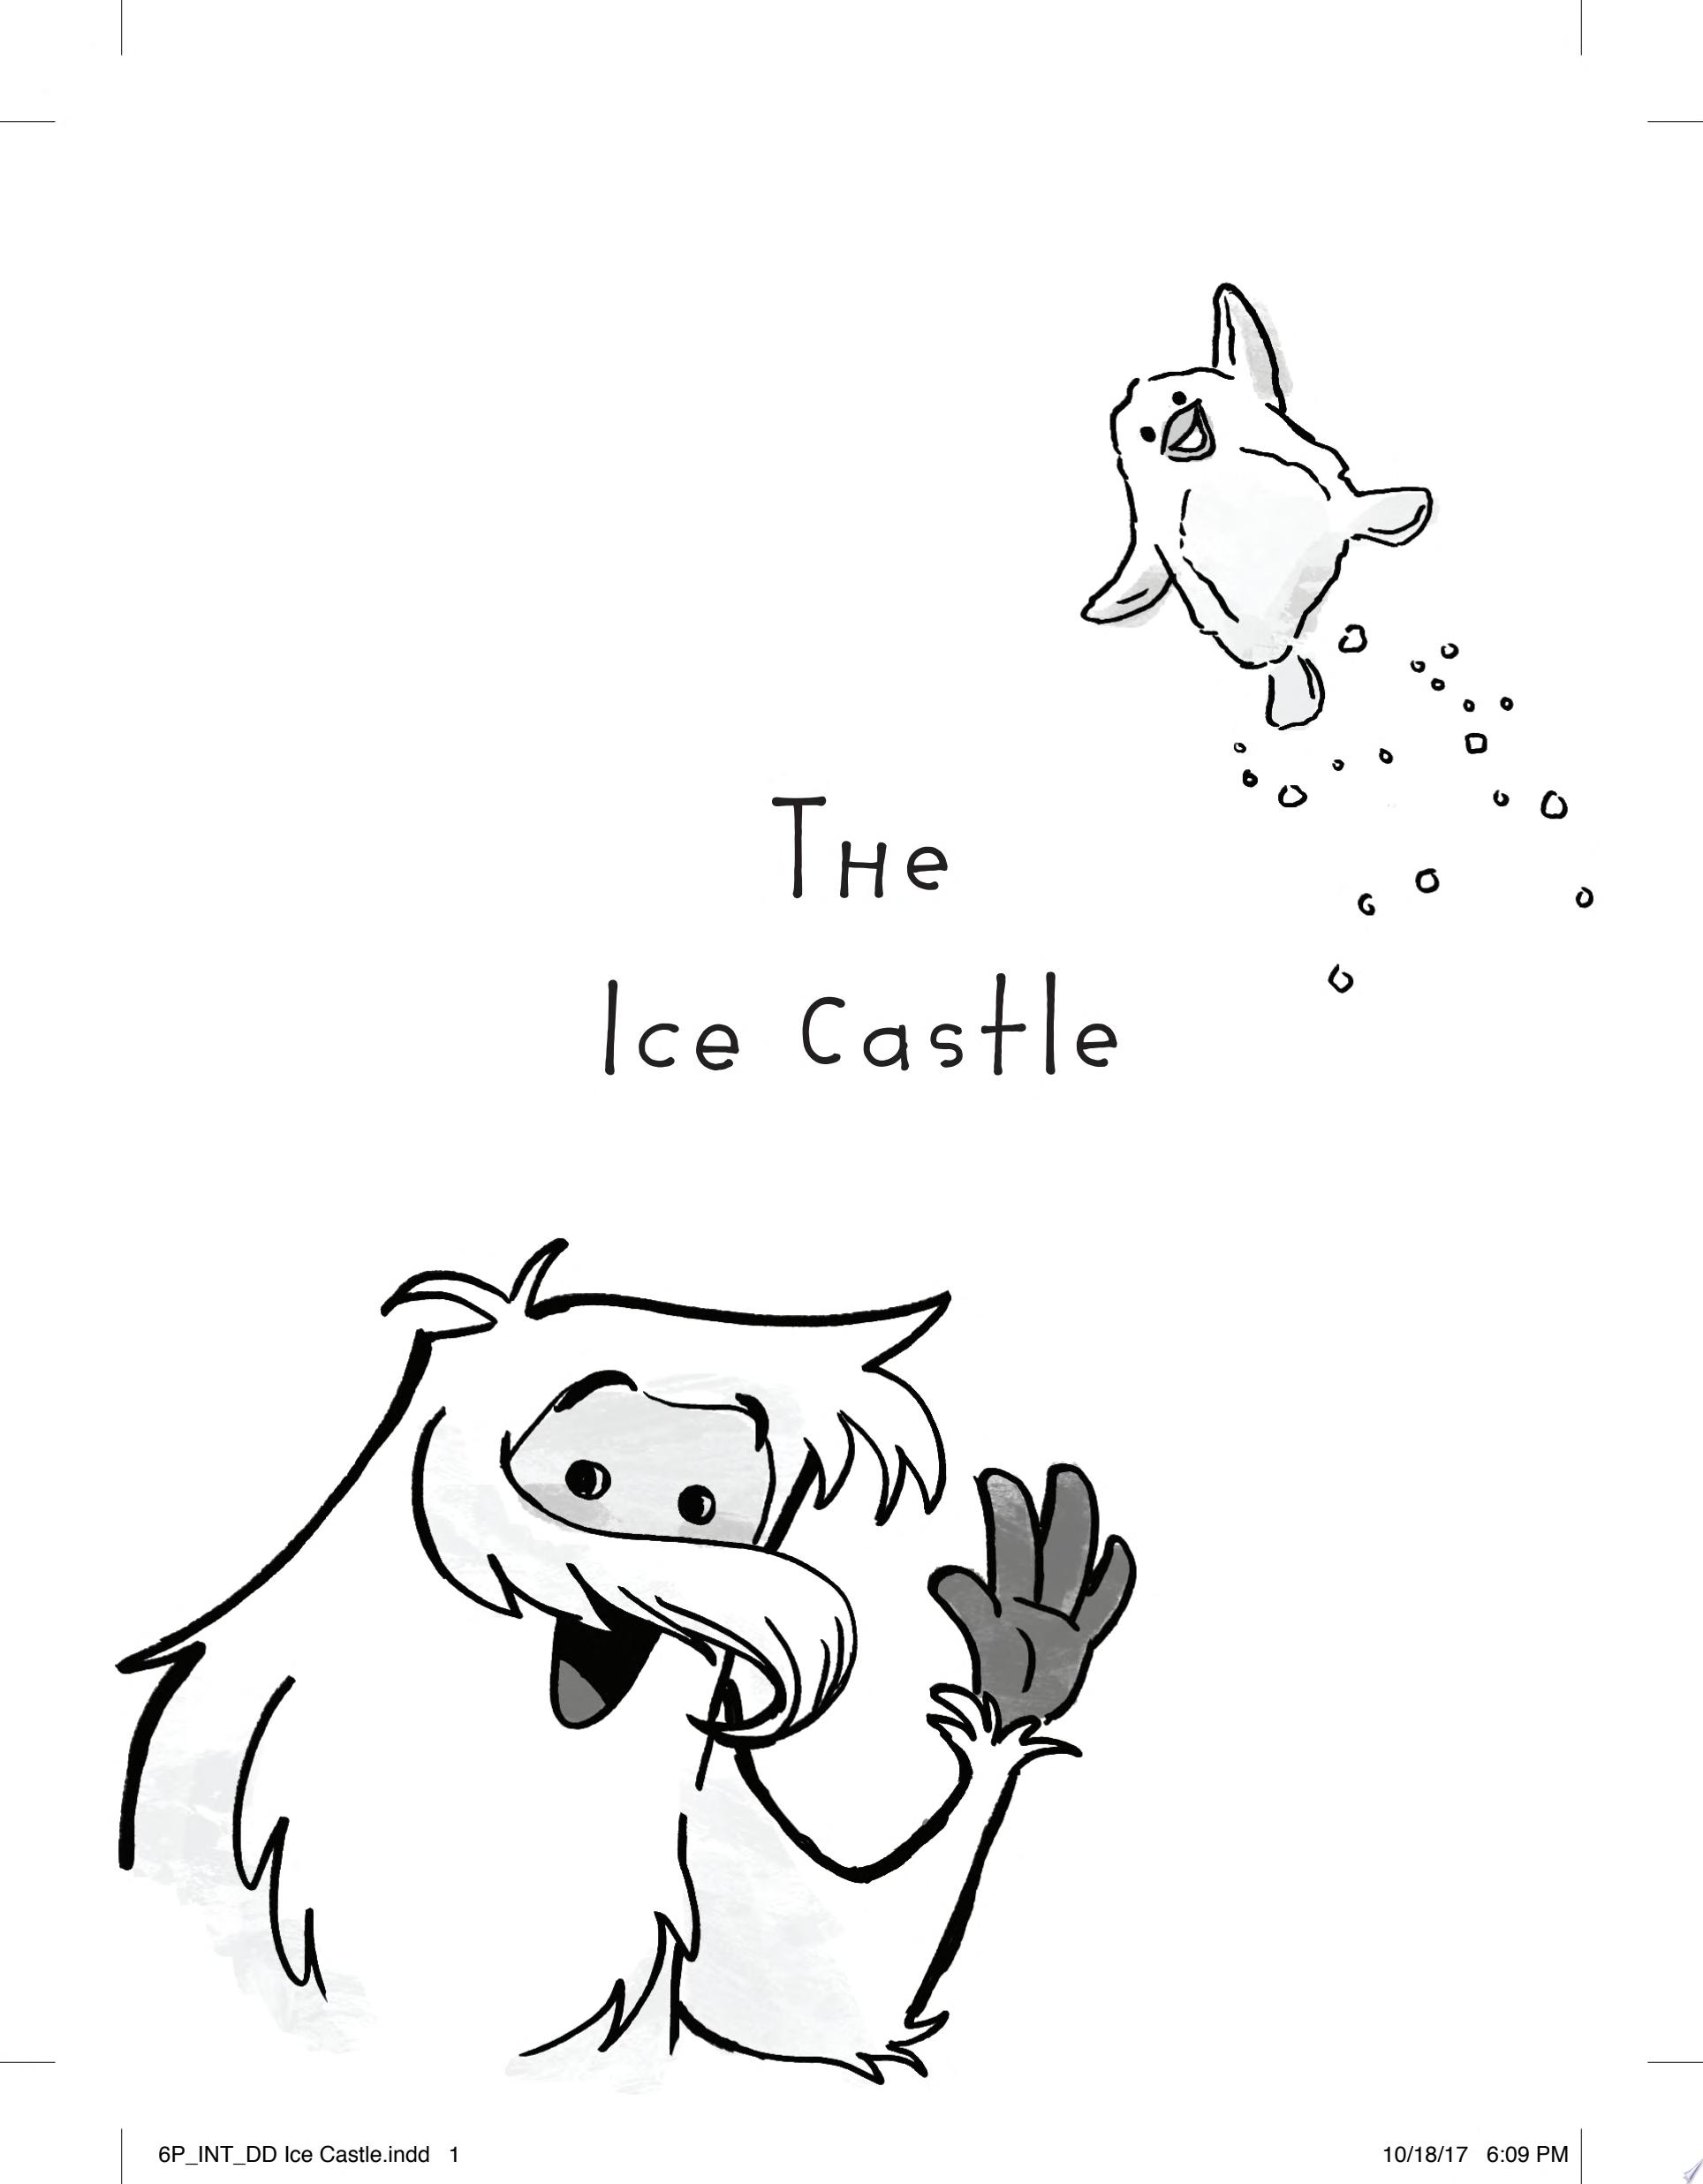 Image for "The Ice Castle"